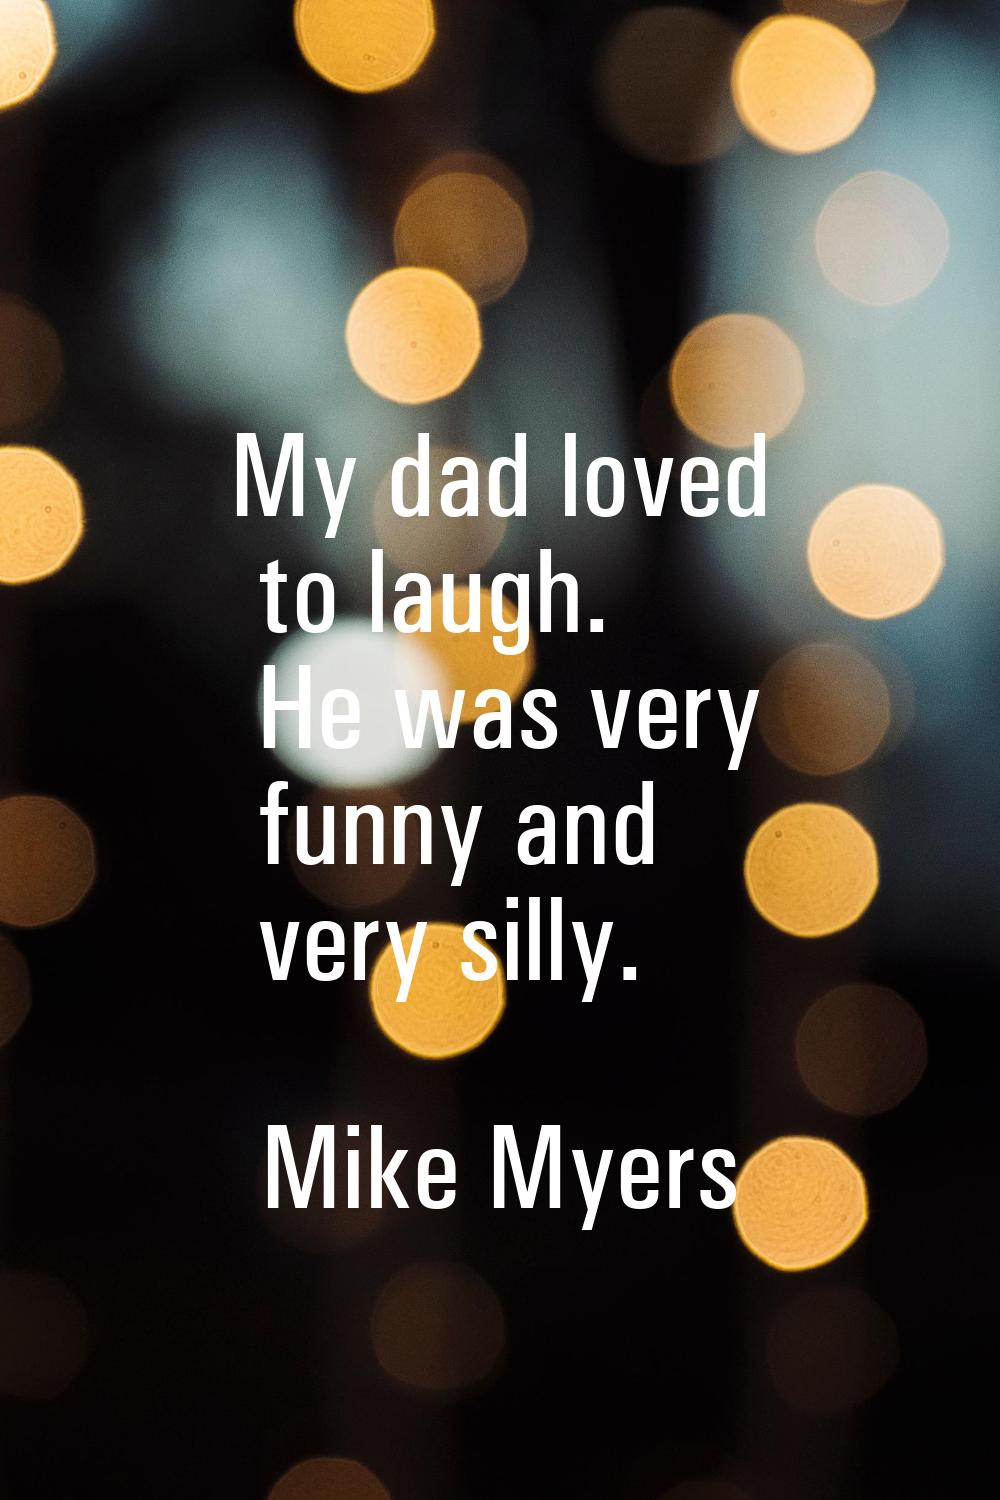 My dad loved to laugh. He was very funny and very silly.